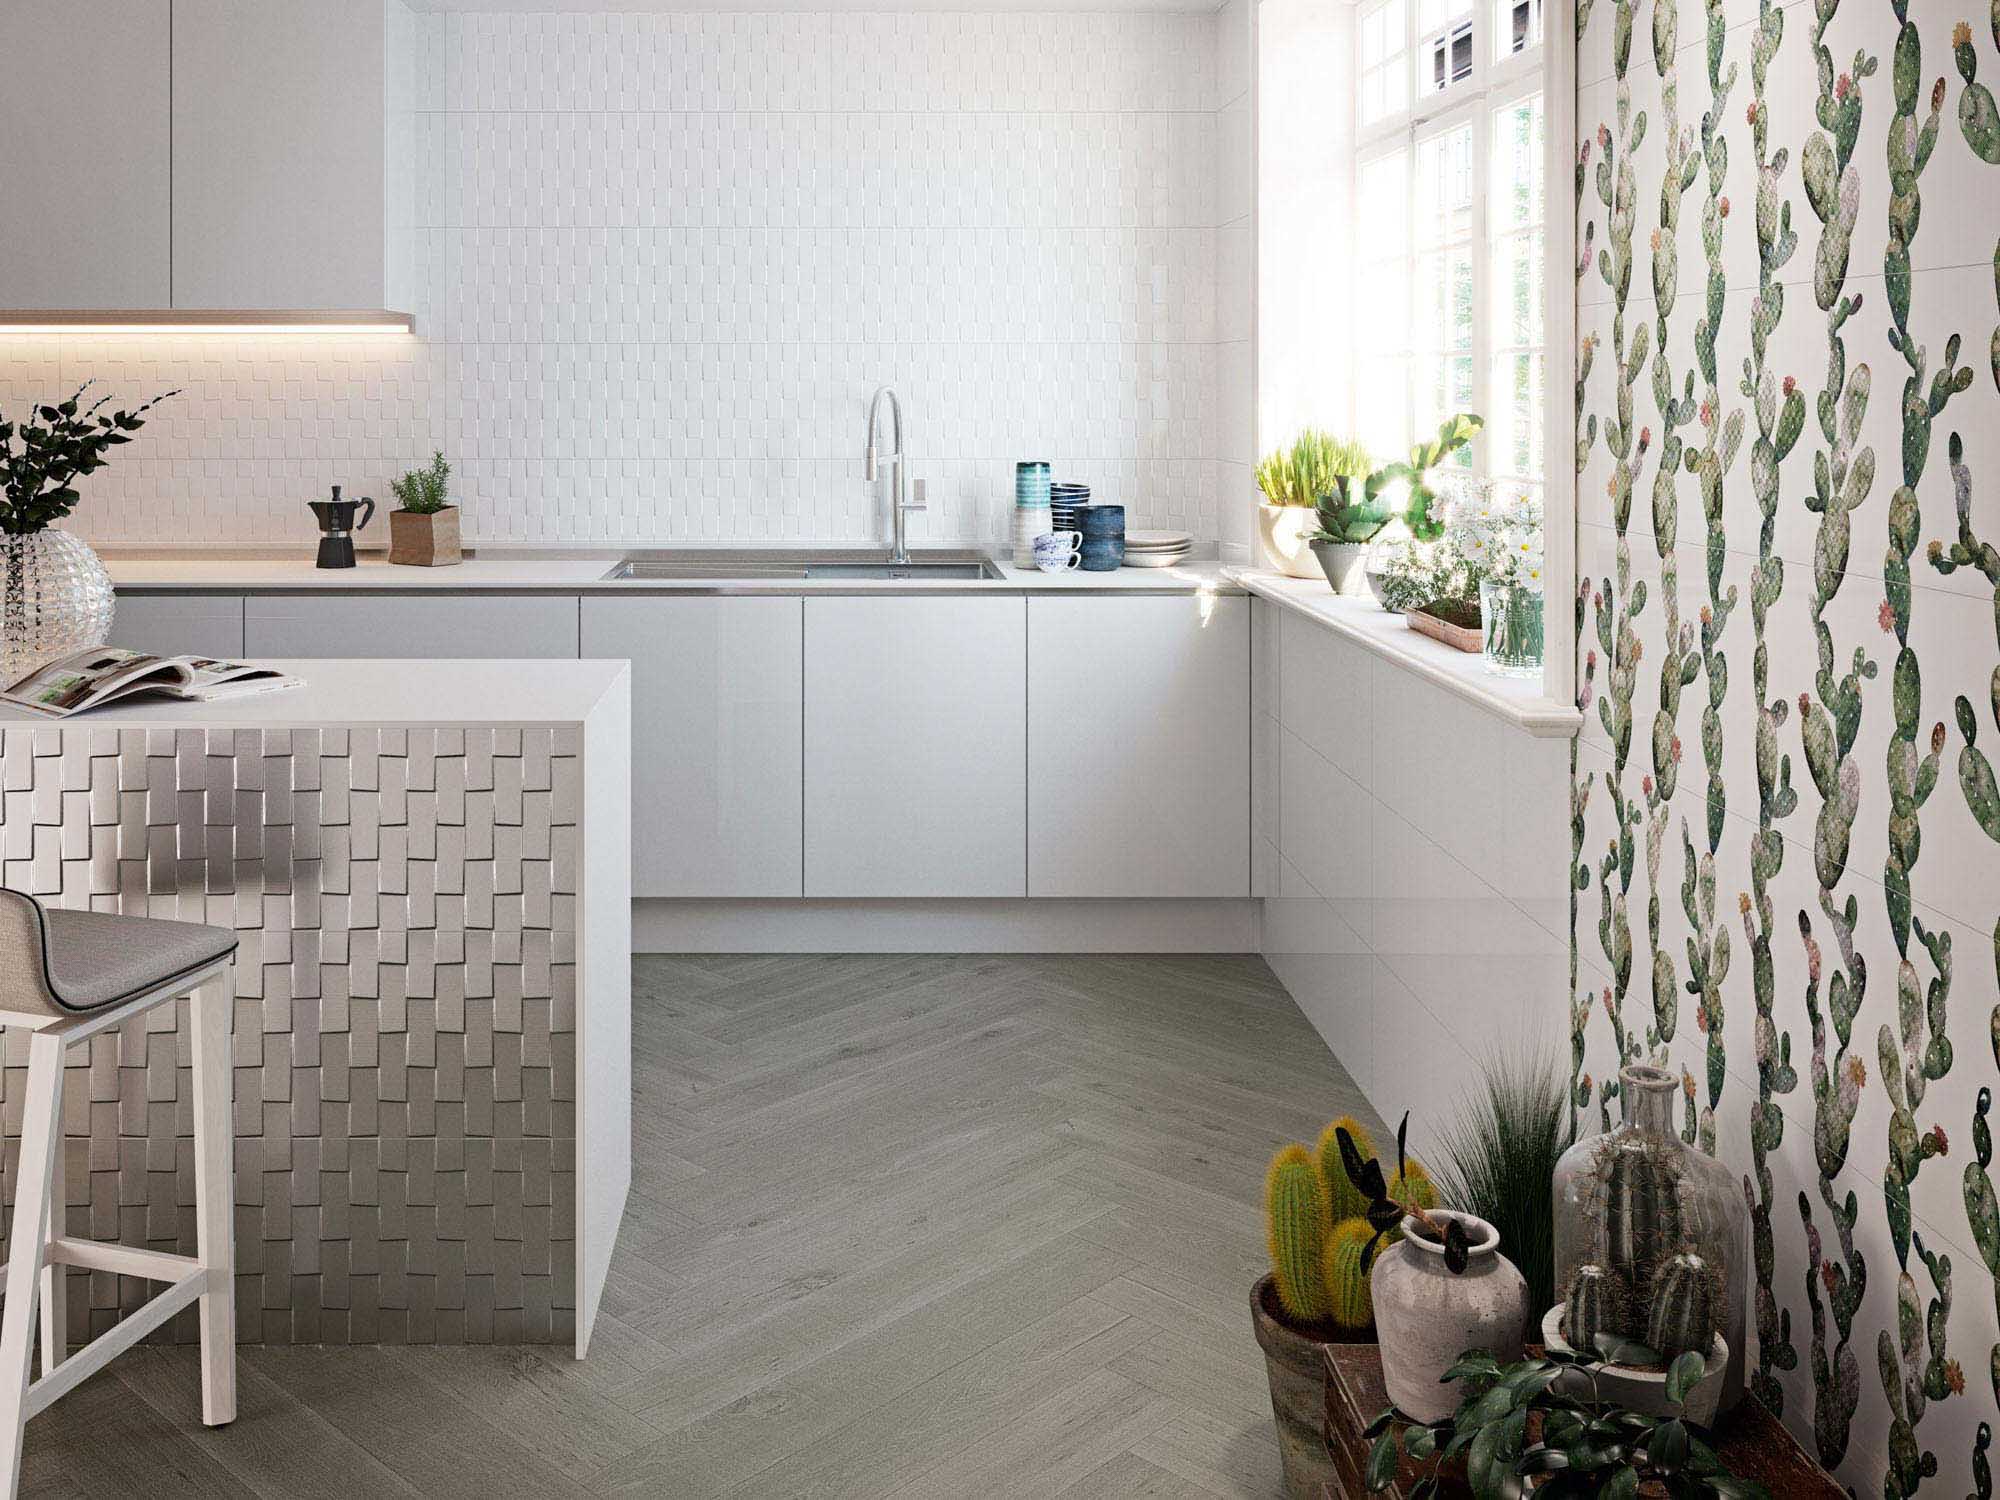 white kitchen with hard-wearing wooden floor tiles